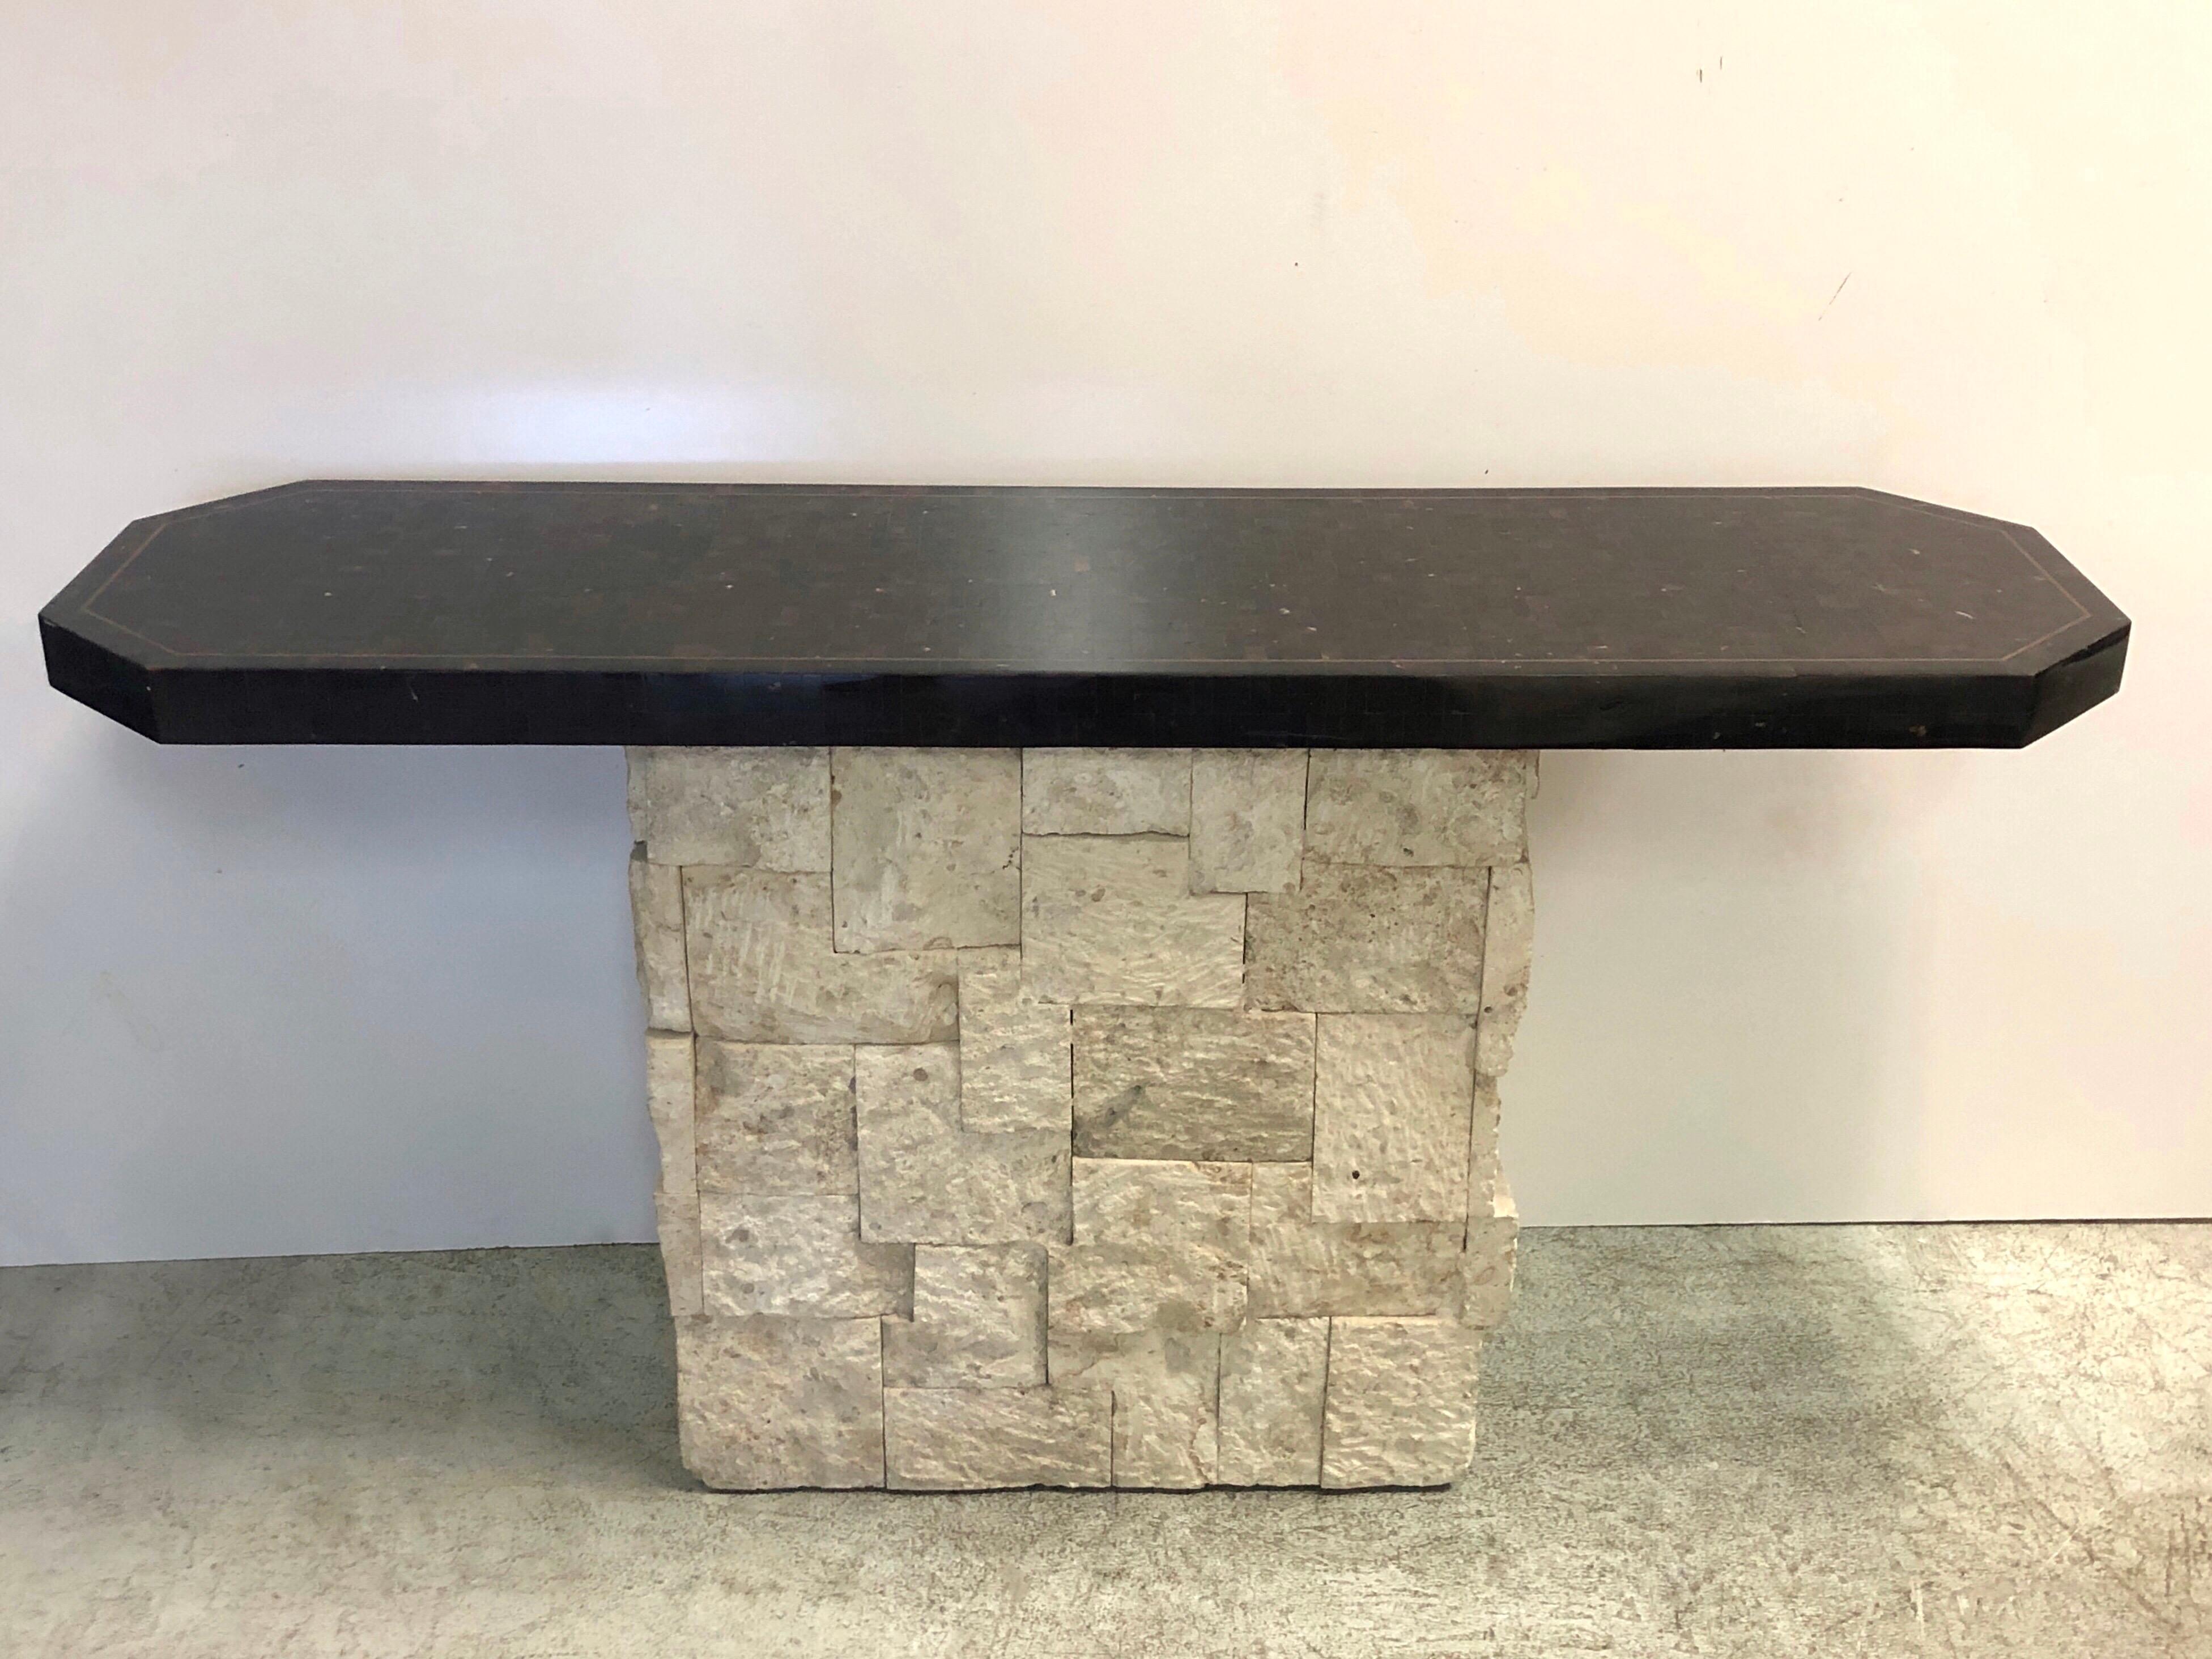 A console table by Maitland Smith. The rectangular base is made of multiple pieces of raw travertine in different sizes and depths. The top is tessellated faux tortoise with brass inlaid. Finished on all sides.